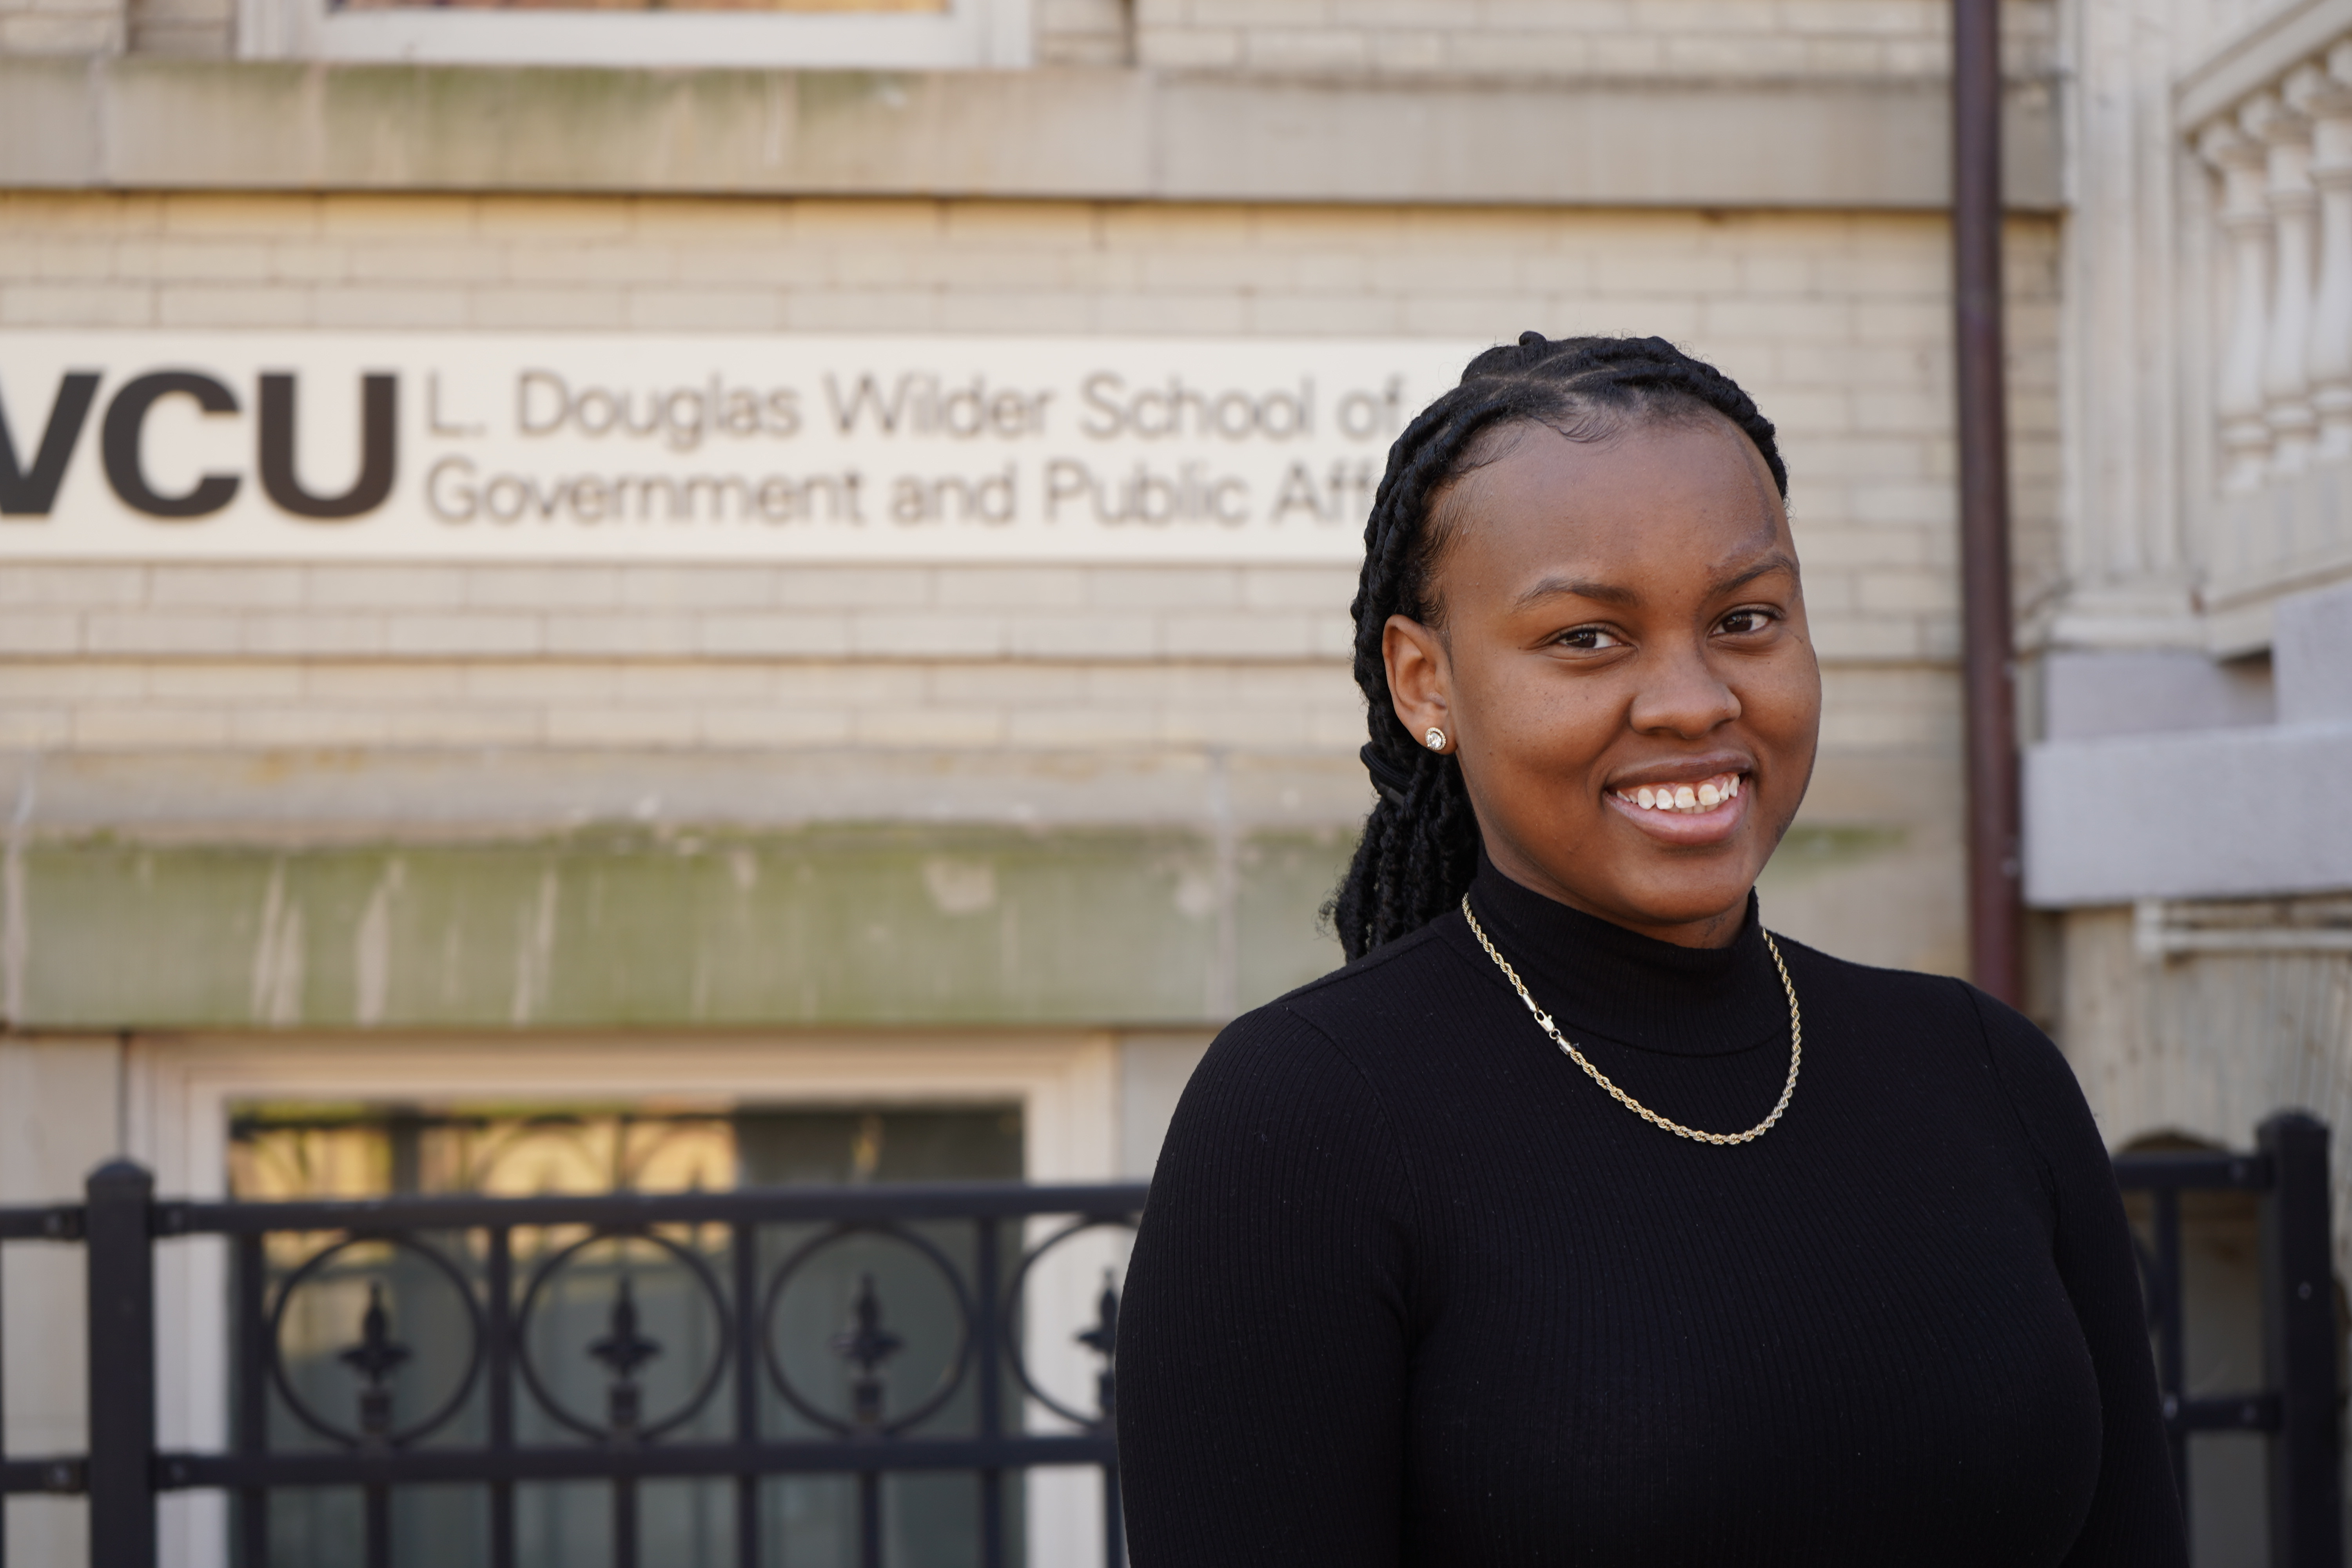 Jada Whitley, a dedicated student with dual majors in criminal justice and homeland security and Emergency Preparedness, will proudly represent the Class of 2023 as the student speaker at the Wilder School's Graduation Ceremony on December 8.